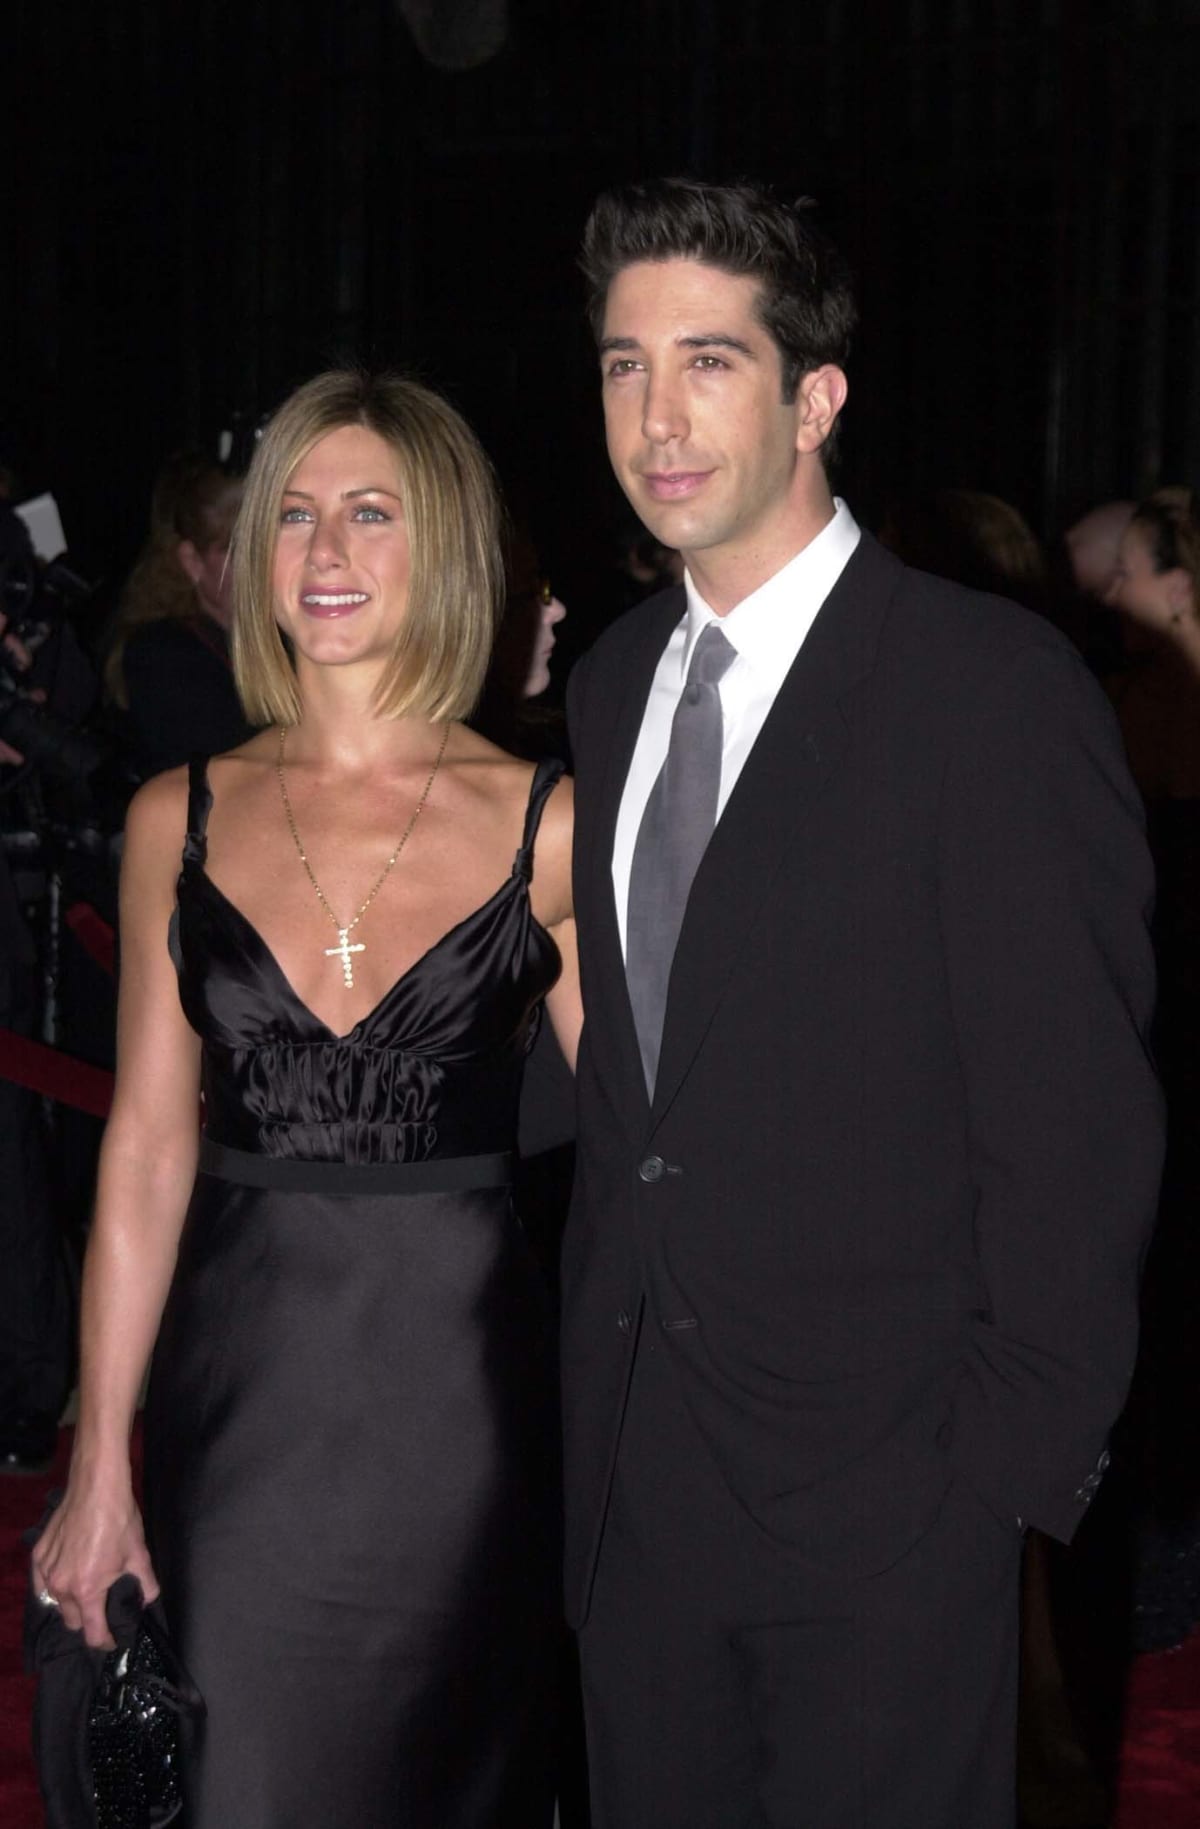 Jennifer Aniston and David Schwimmer during Peoples Choice 2001. (Photo by Jeff Kravitz/FilmMagic, Inc)